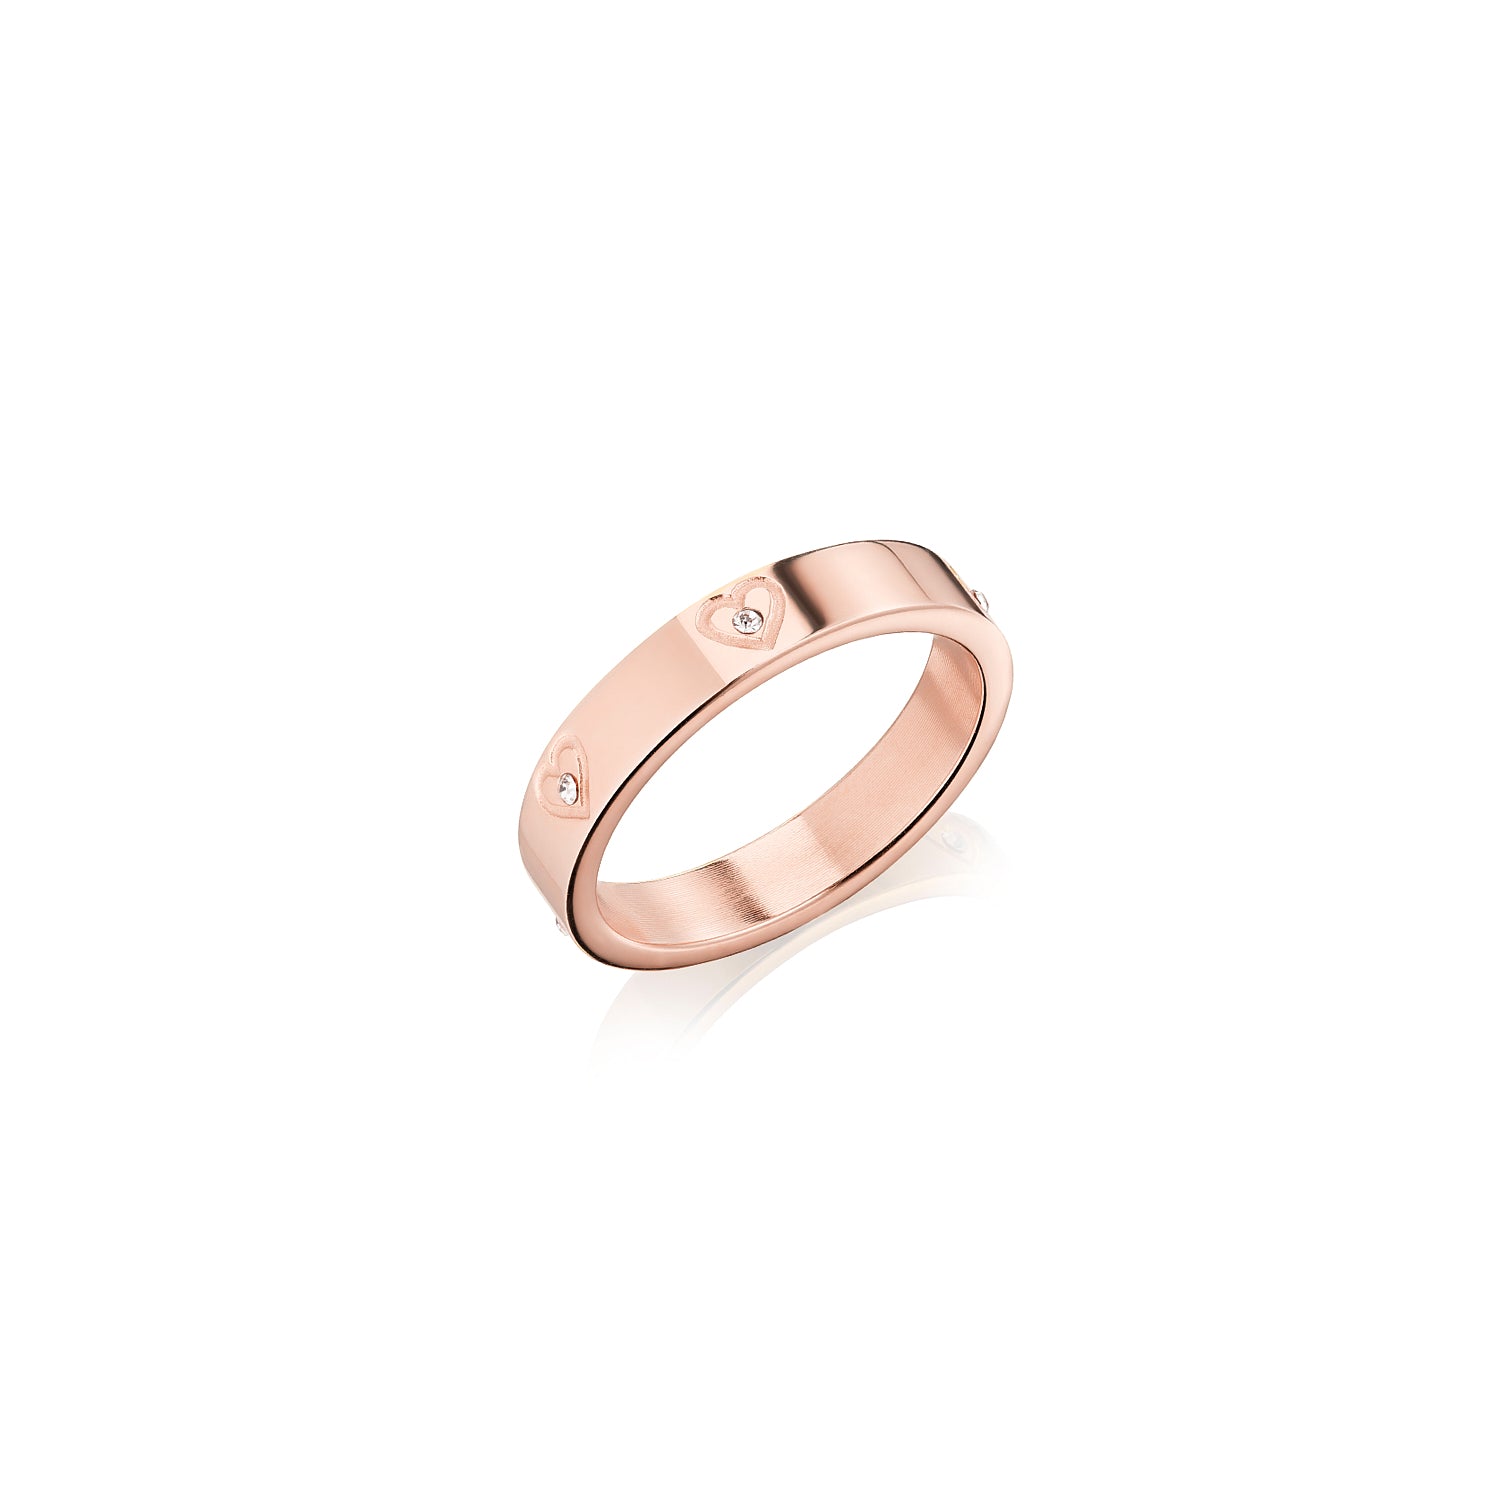 Empreinte Large Ring, Pink Gold - Jewelry - Categories